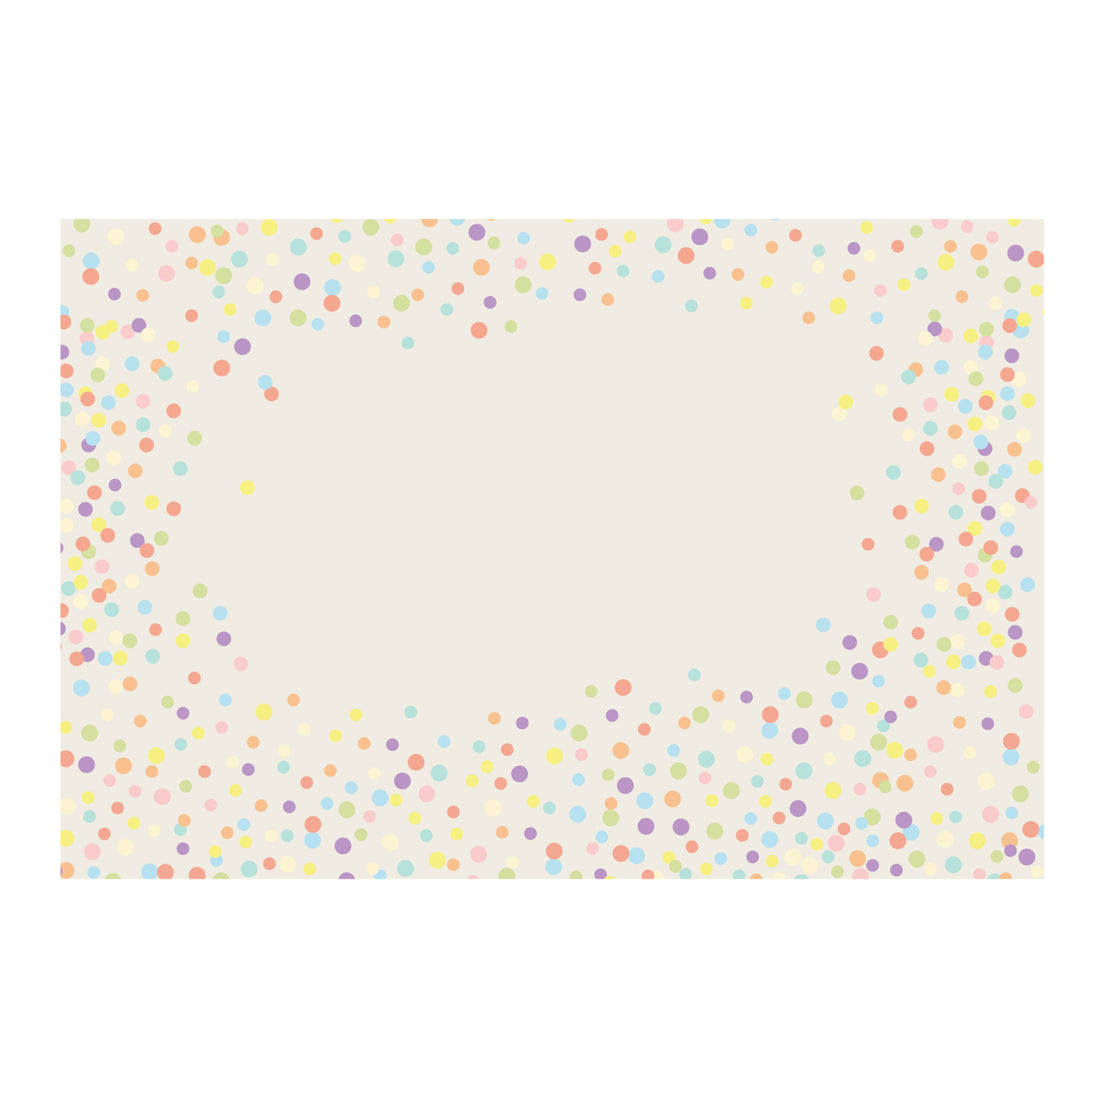 A cream paper placemat with multi color confetti dots scattered around the perimeter of placemat, with an open space in the middle for a personalized message.